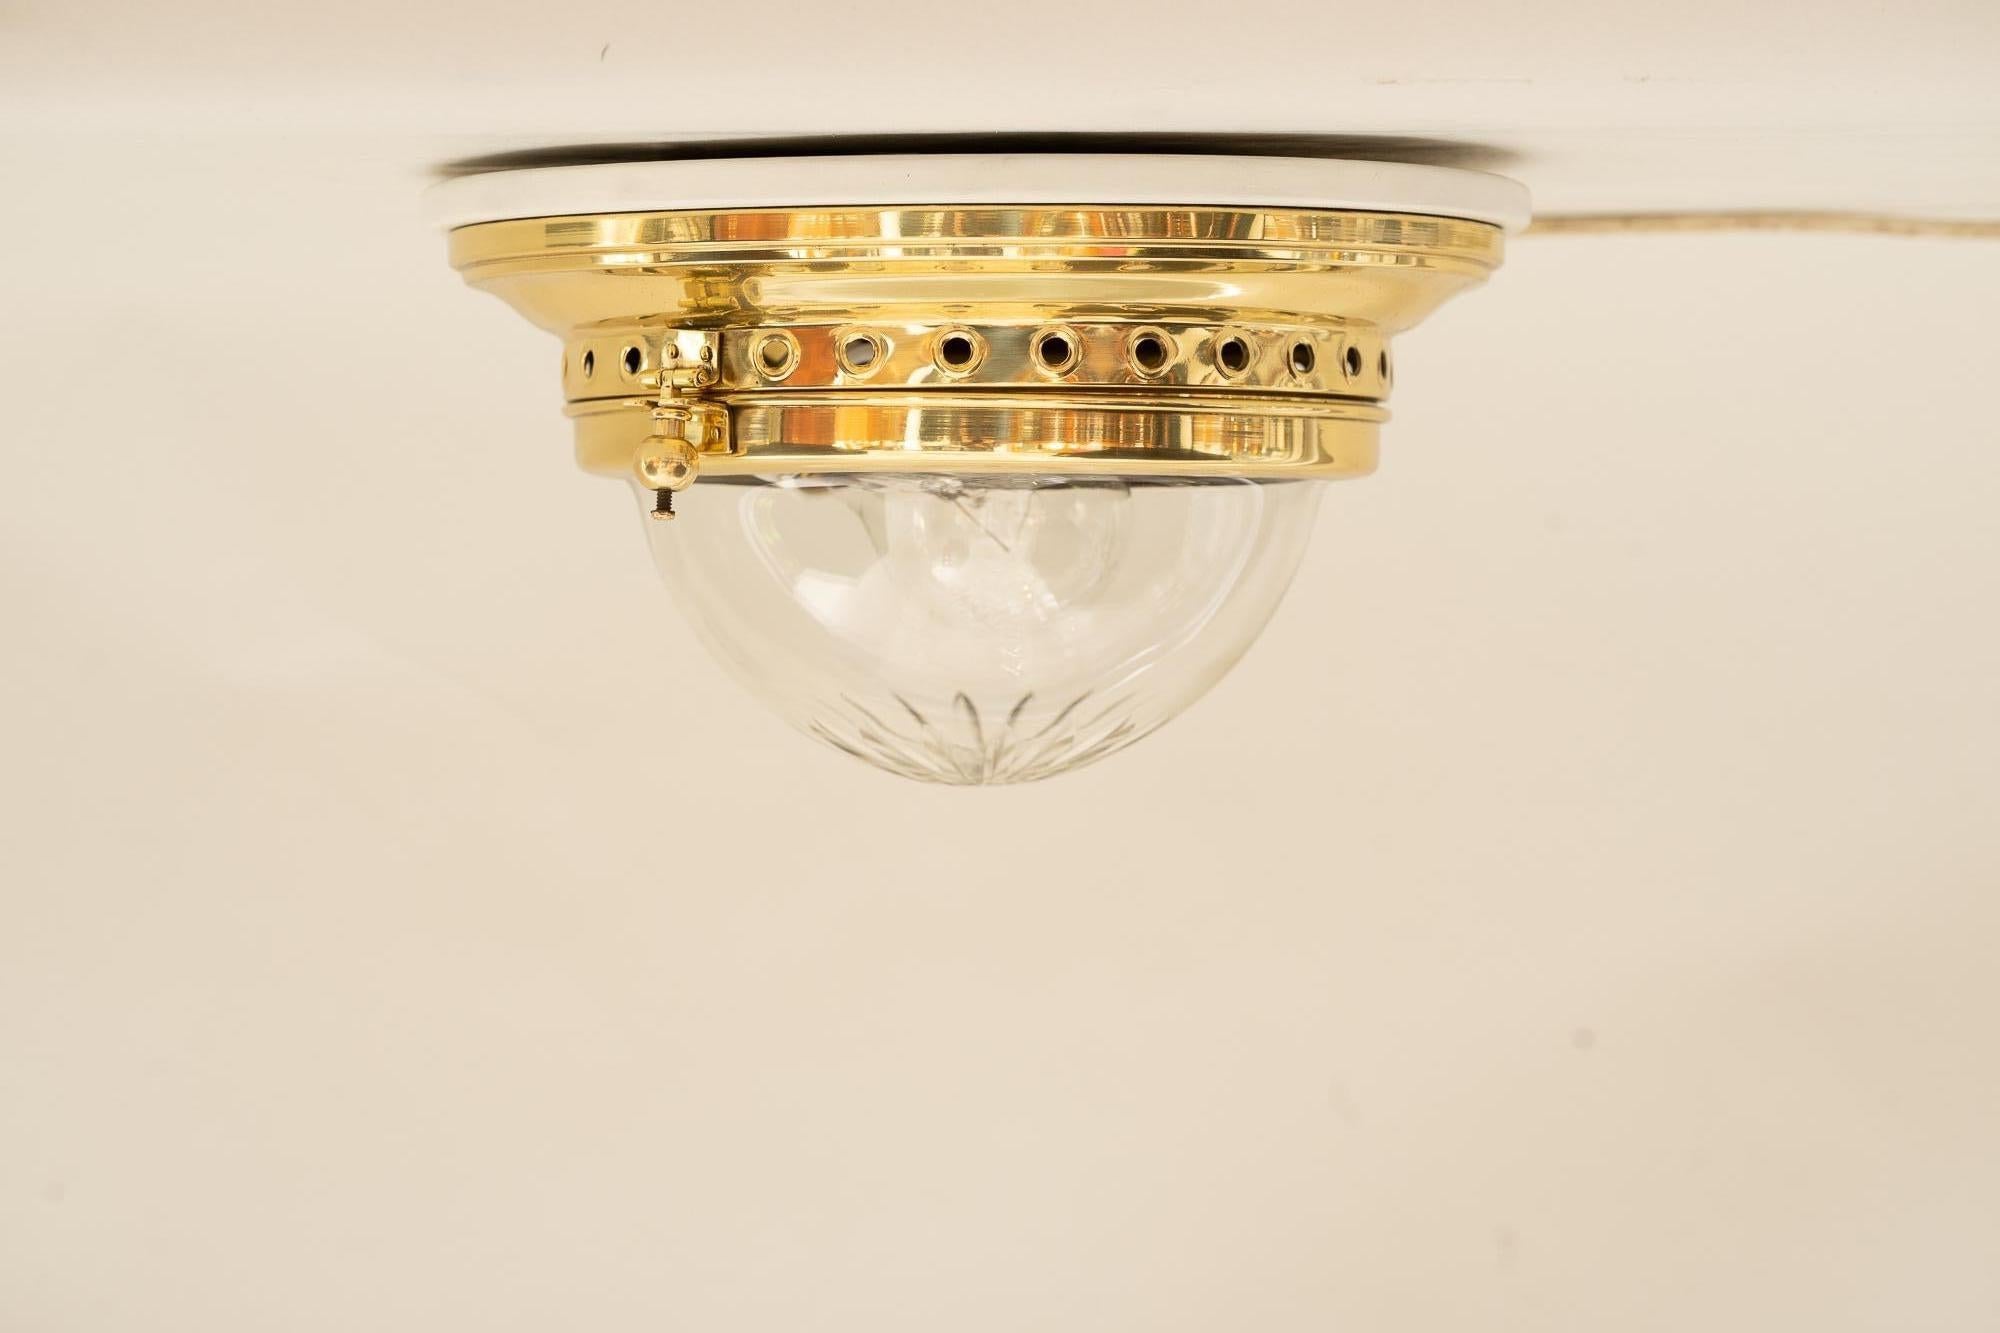 Small art deco ceiling lamp with original cut glass shade around 1920s.
White painted wood plate on top.
Polished and stove enameled.
Bulb is e27.